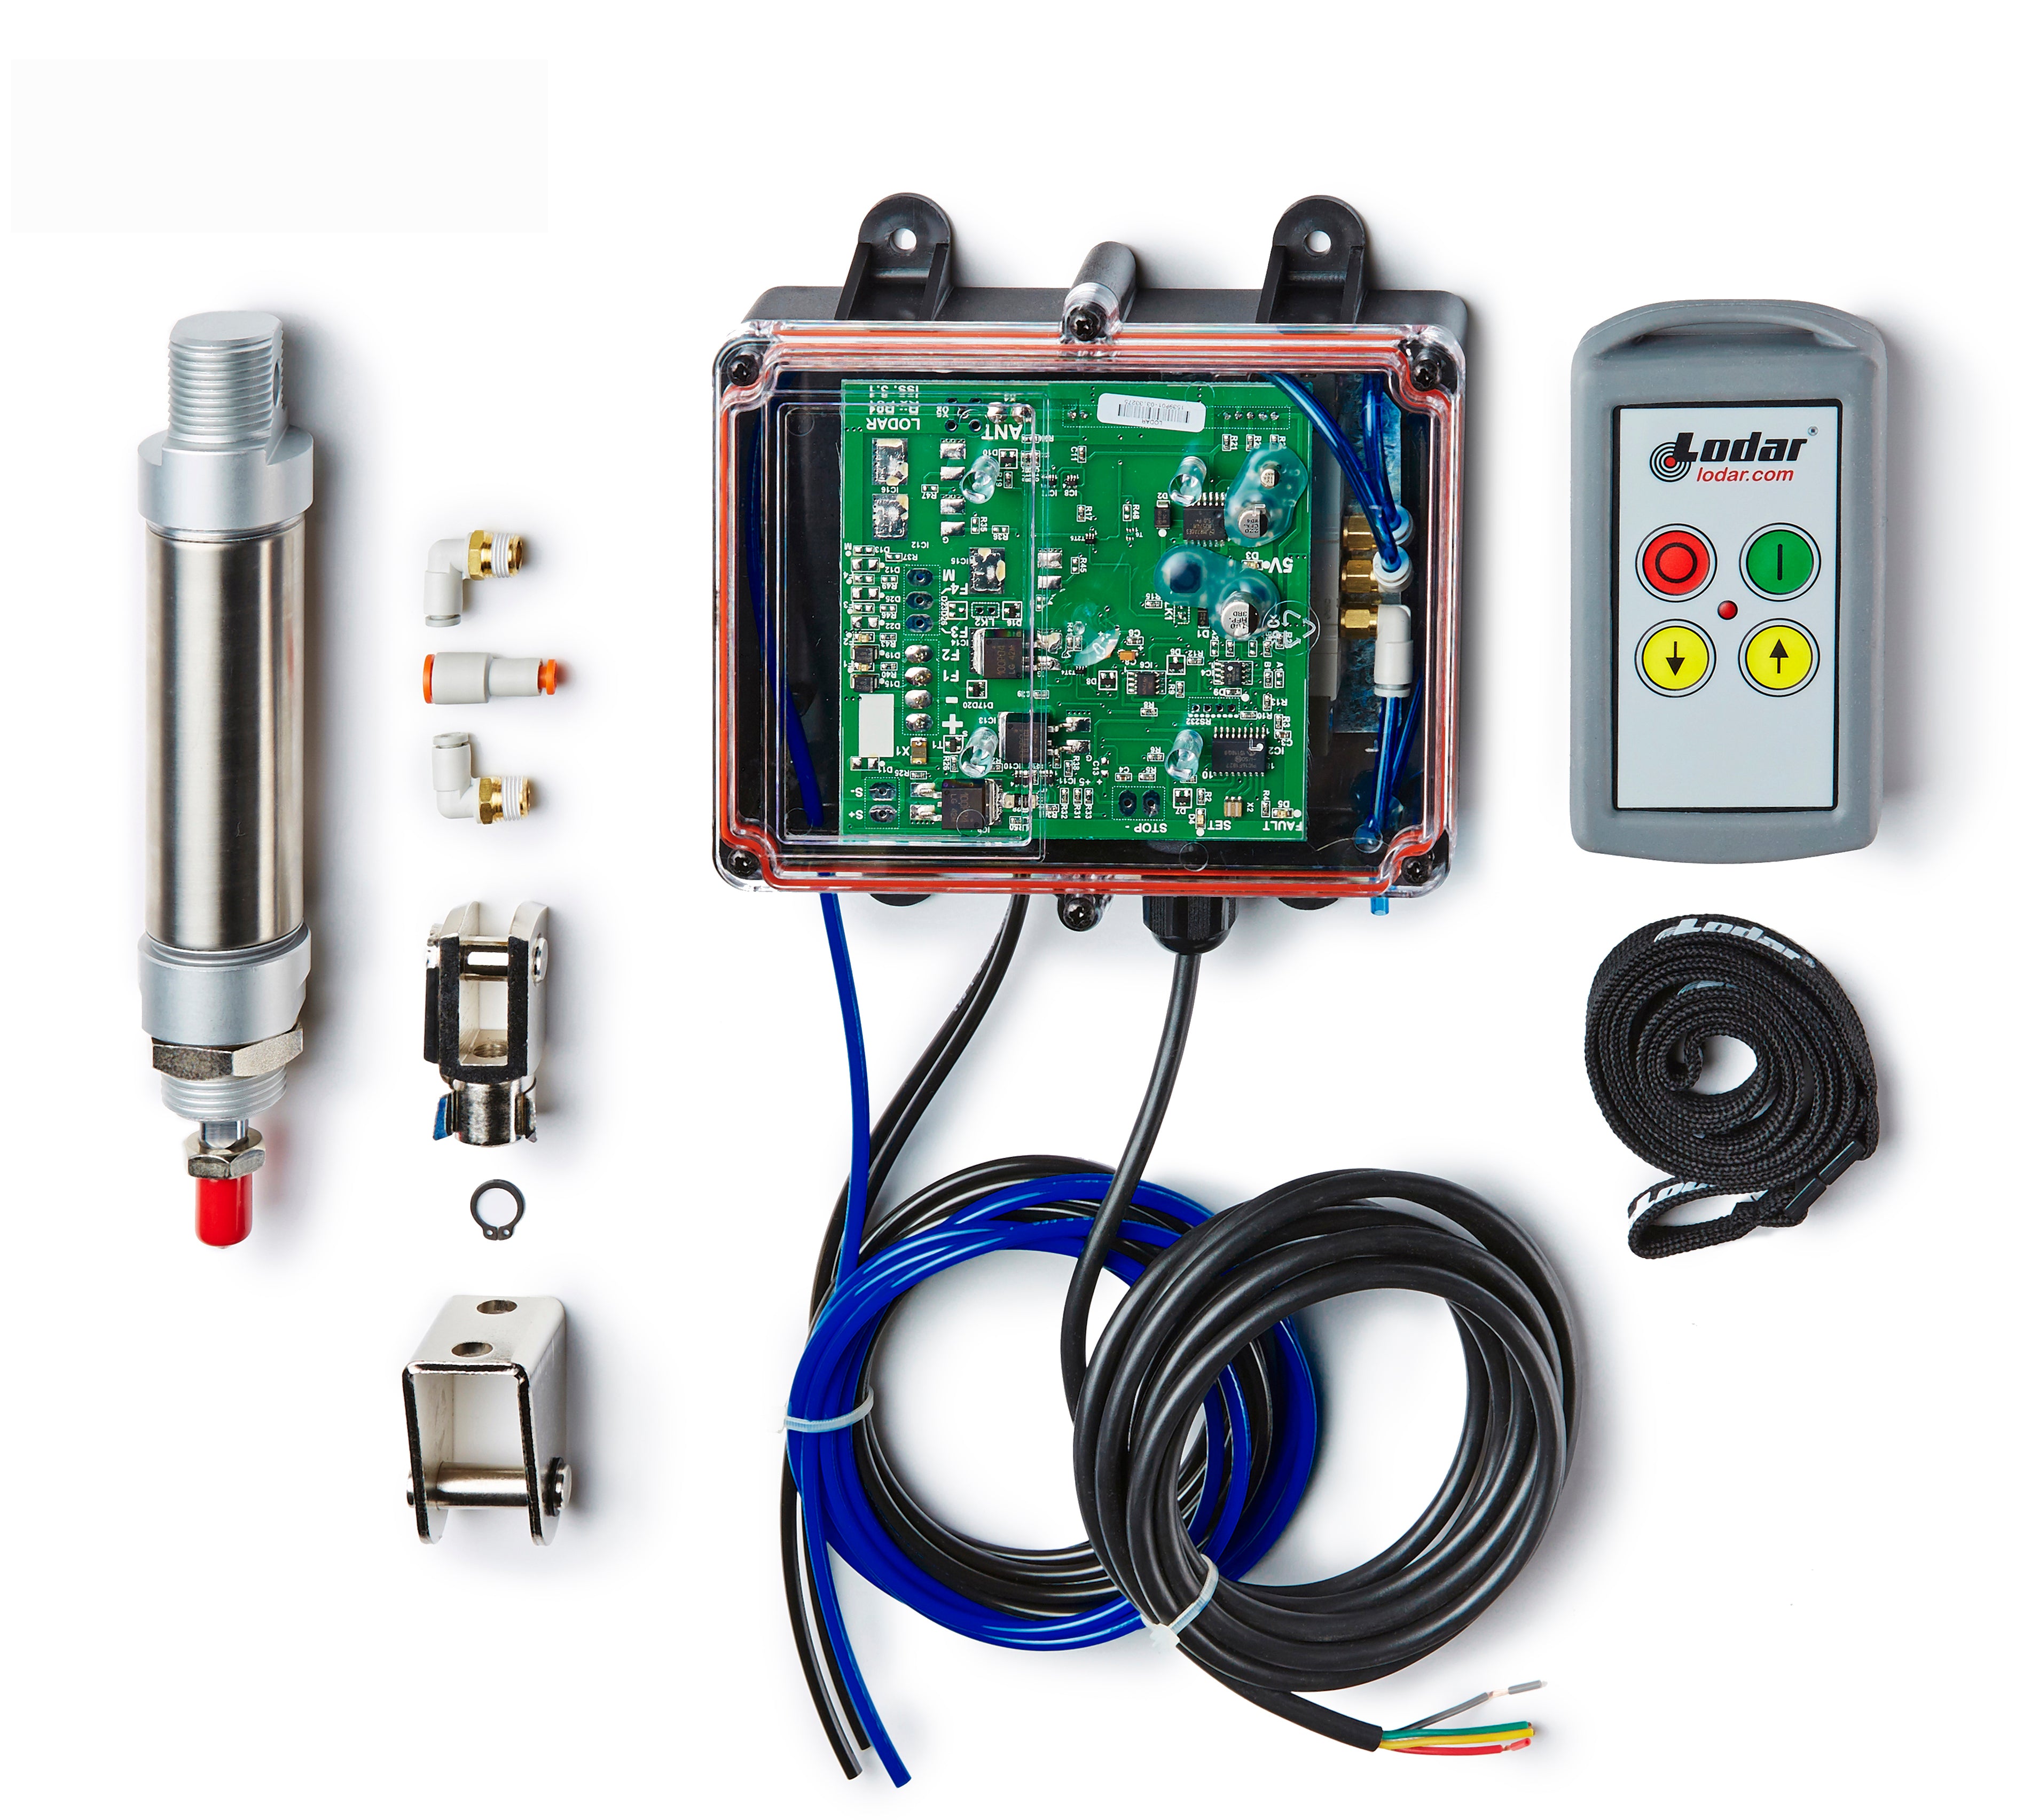 Lodar Wireless Air Actuator Control System - 2 Functions